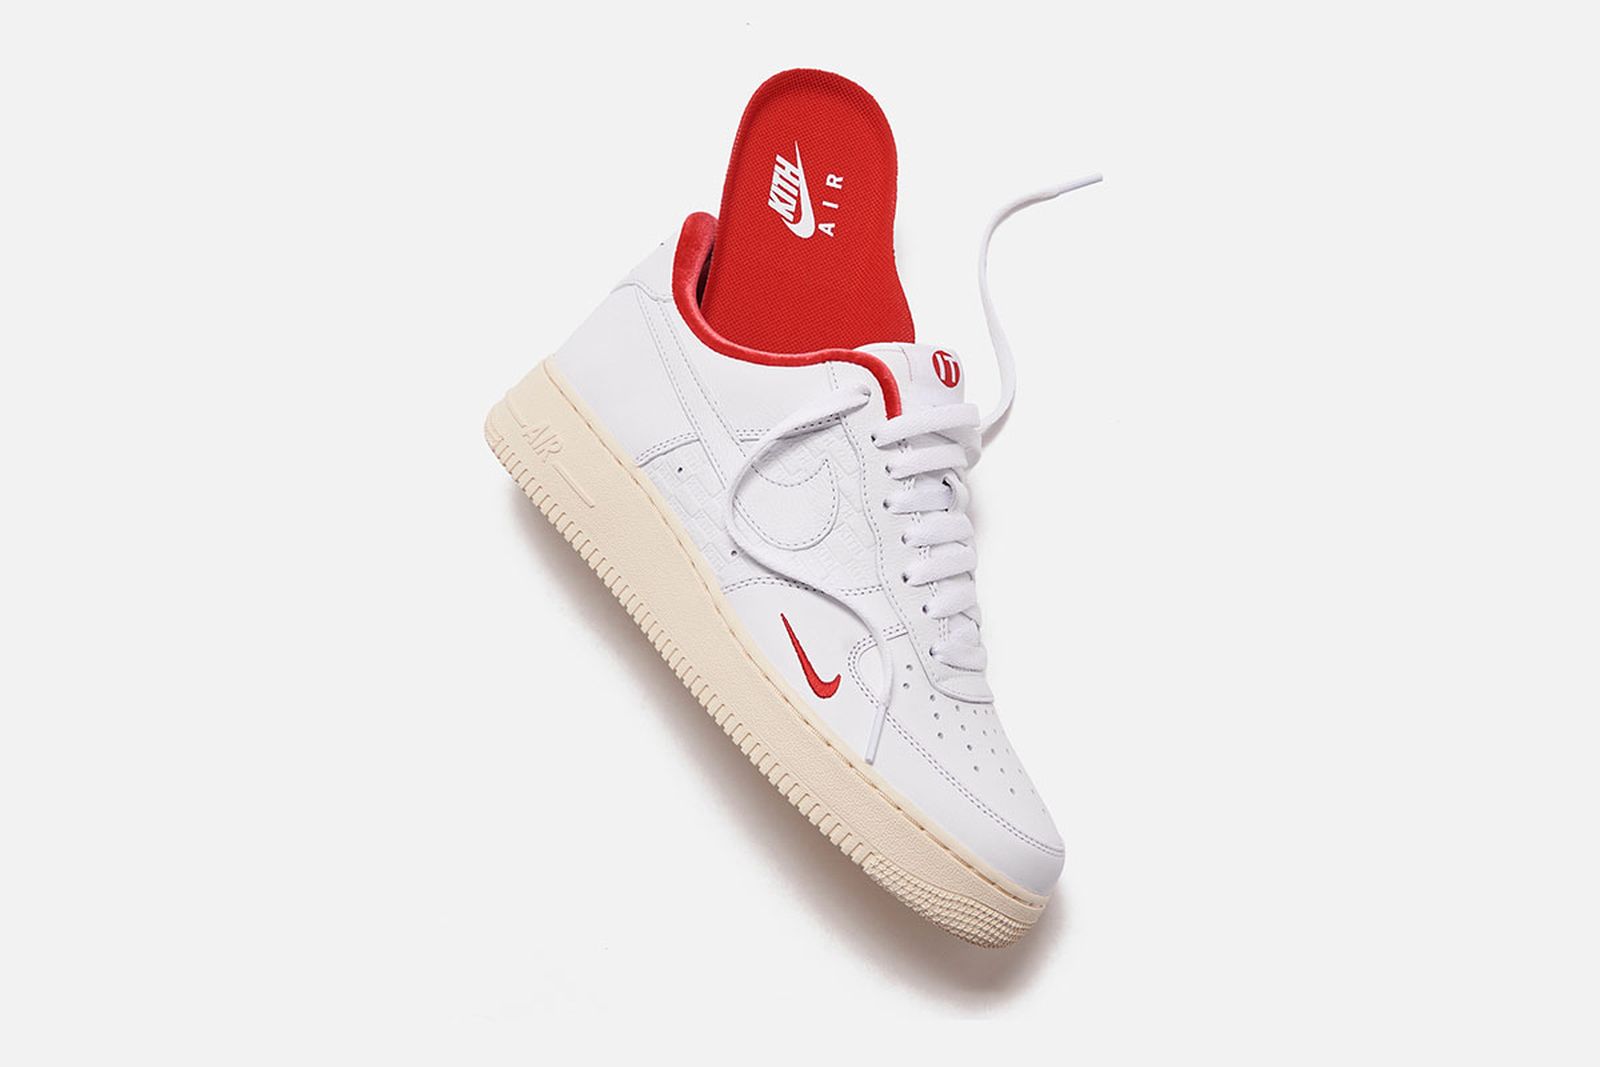 Kith x Nike Air Force 1 “Tokyo”: Official Release Information